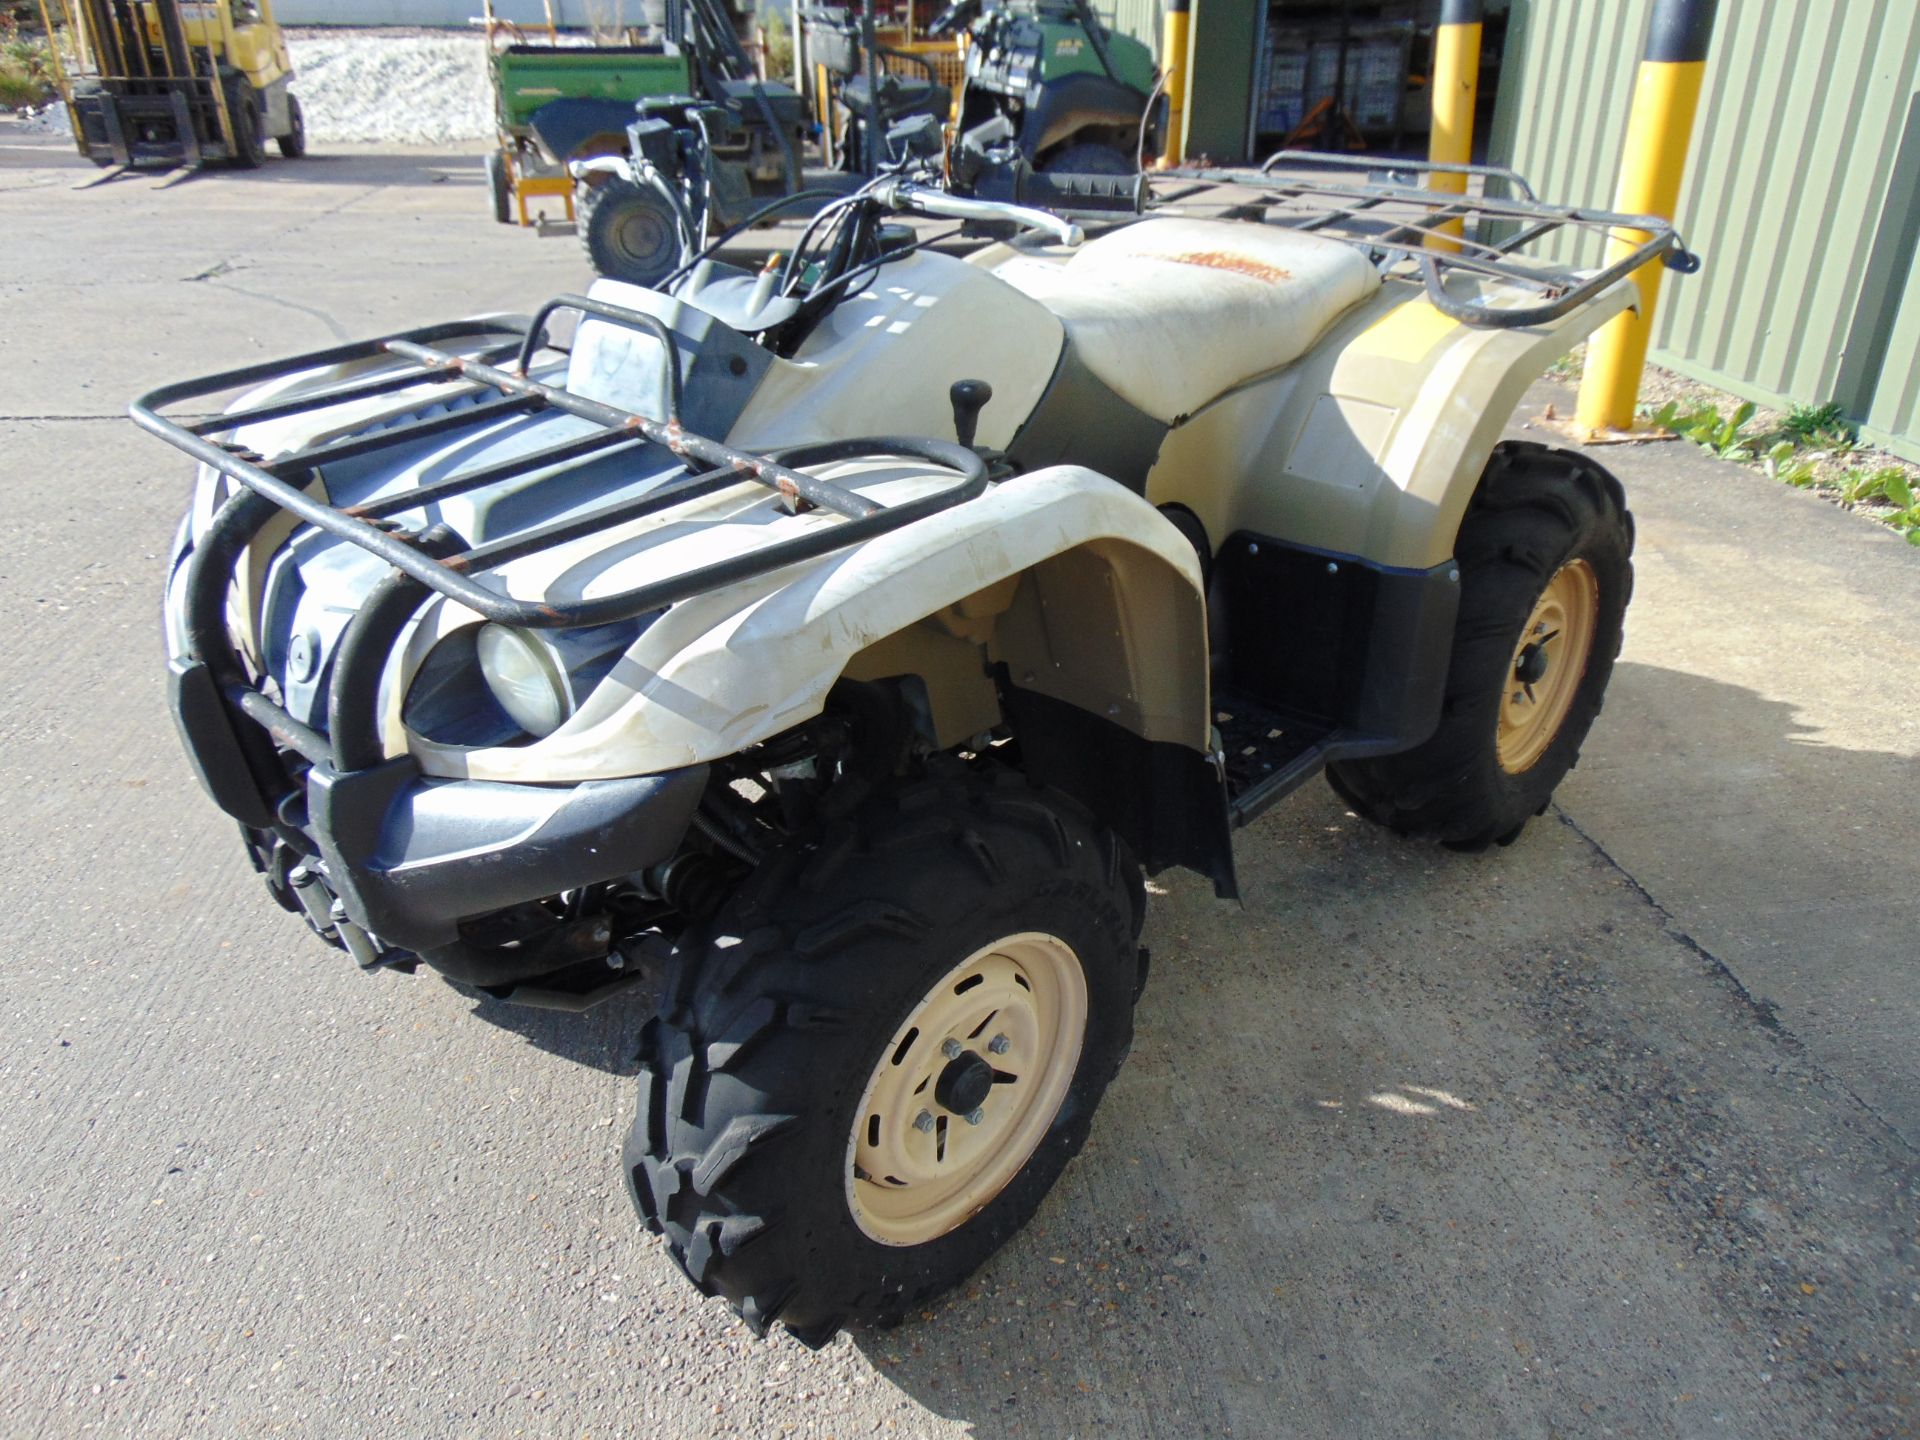 Recent Release Military Specification Yamaha Grizzly 450 4 x 4 ATV Quad Bike - Image 3 of 15